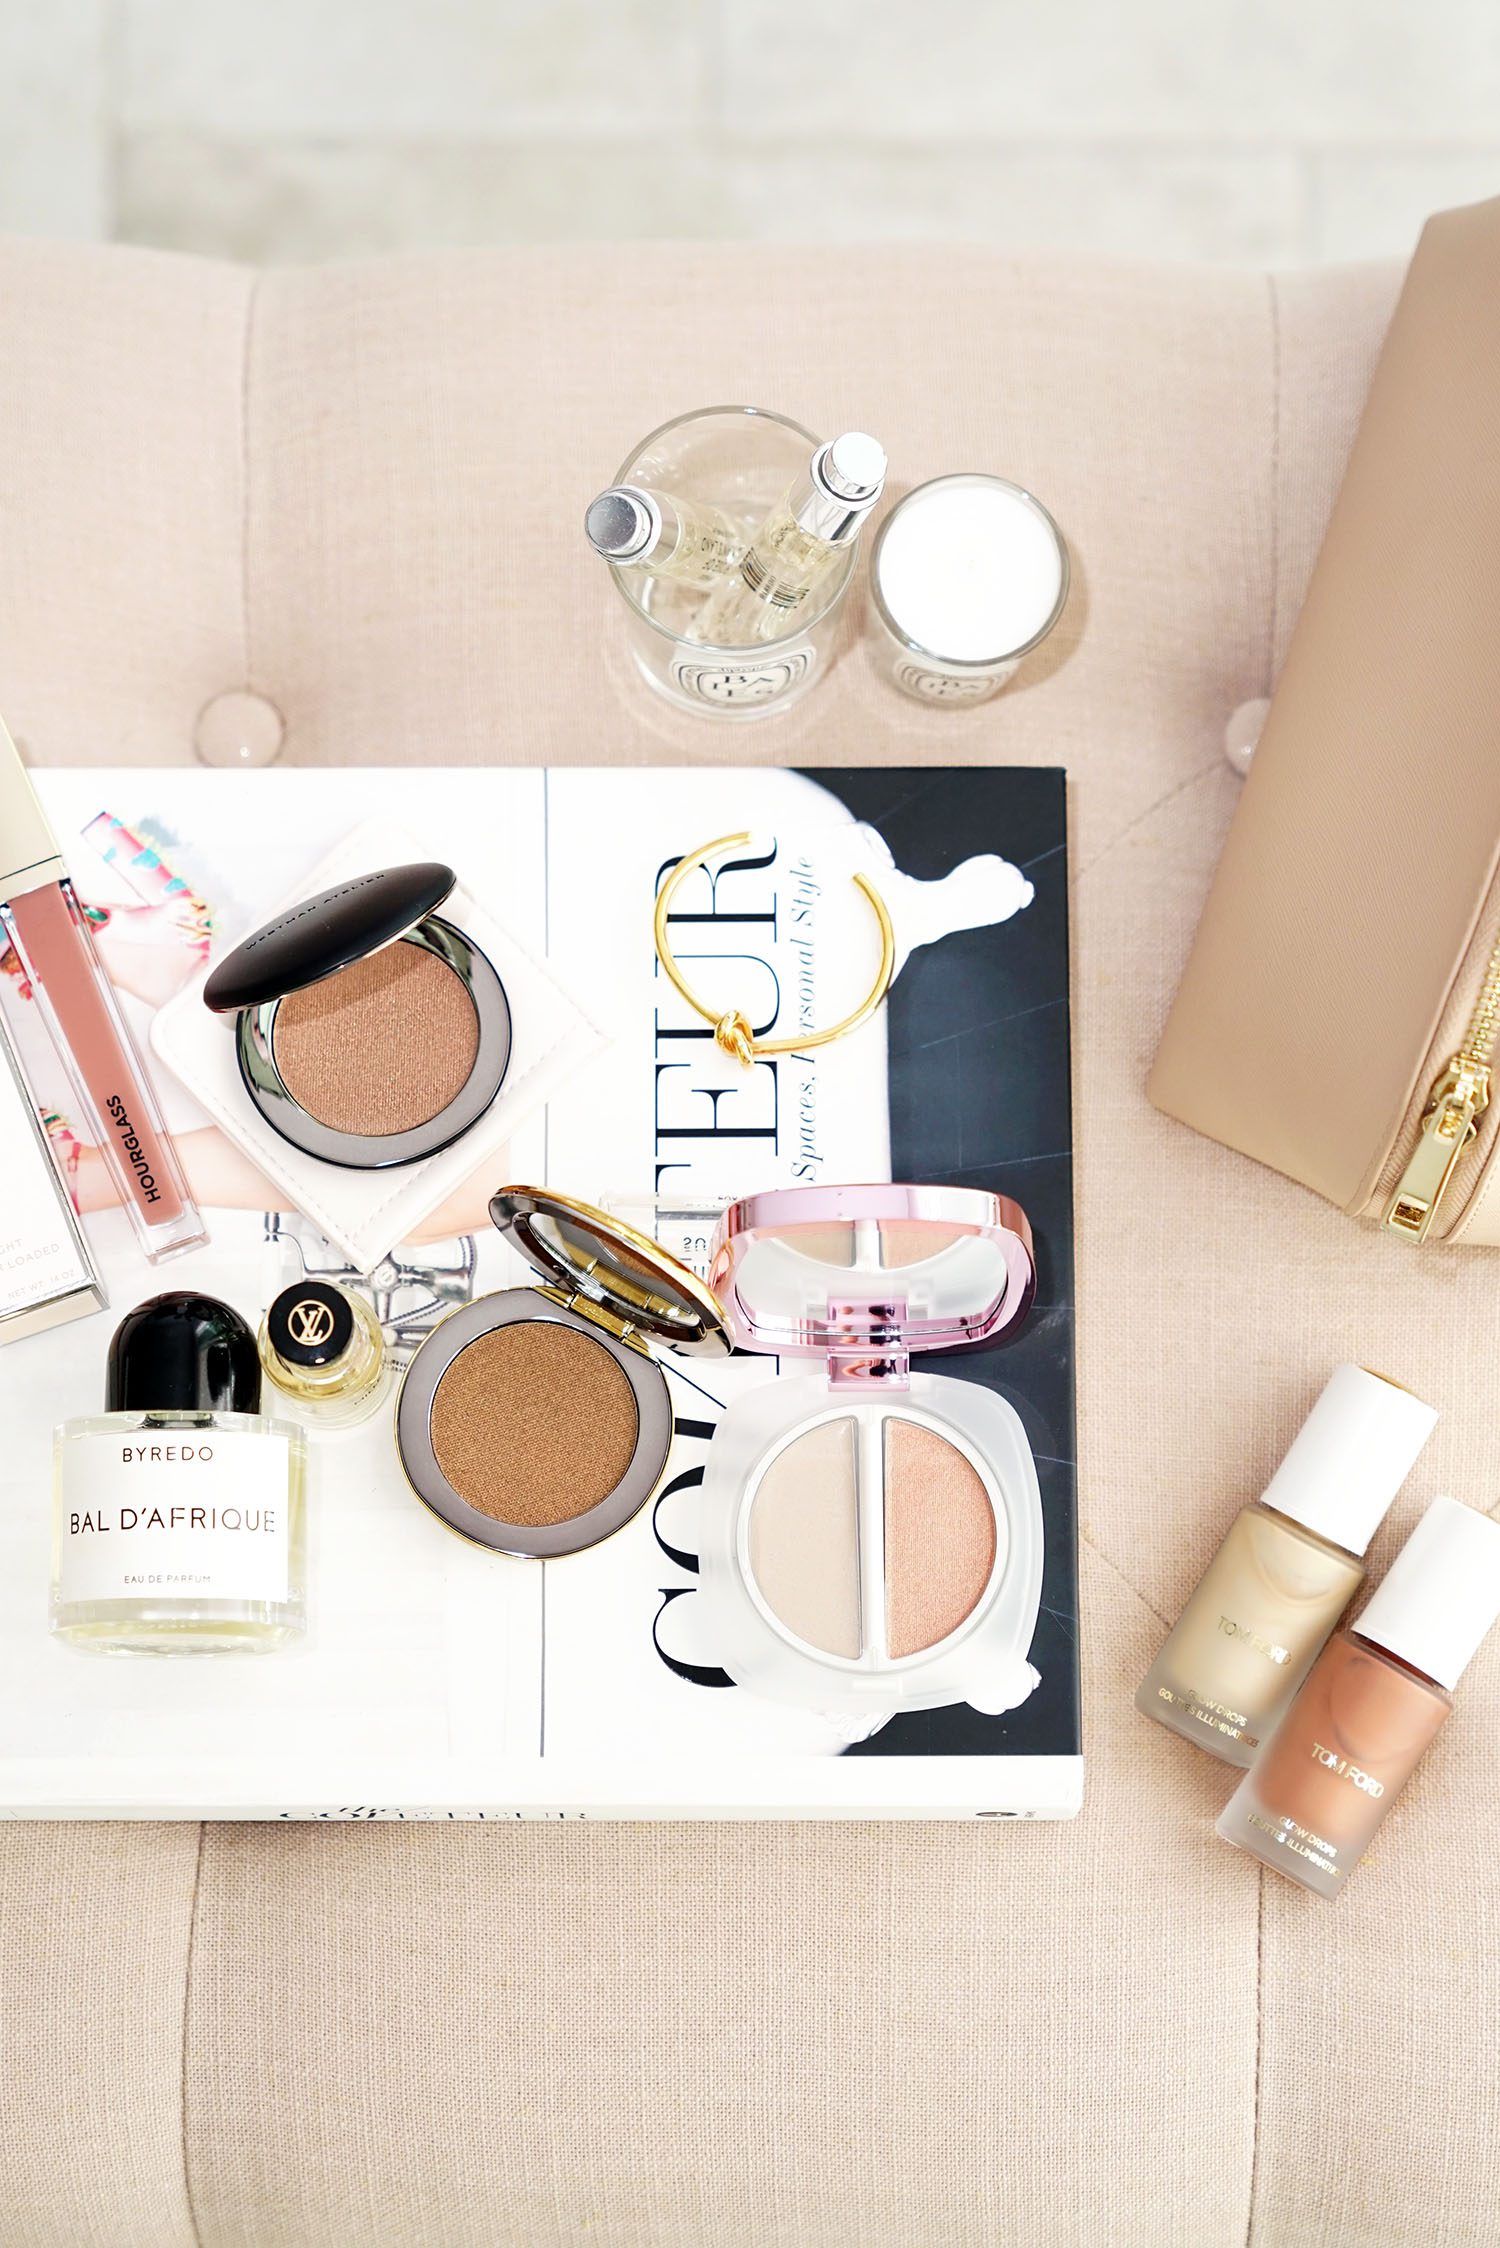 La Mer Archives - The Beauty Look Book